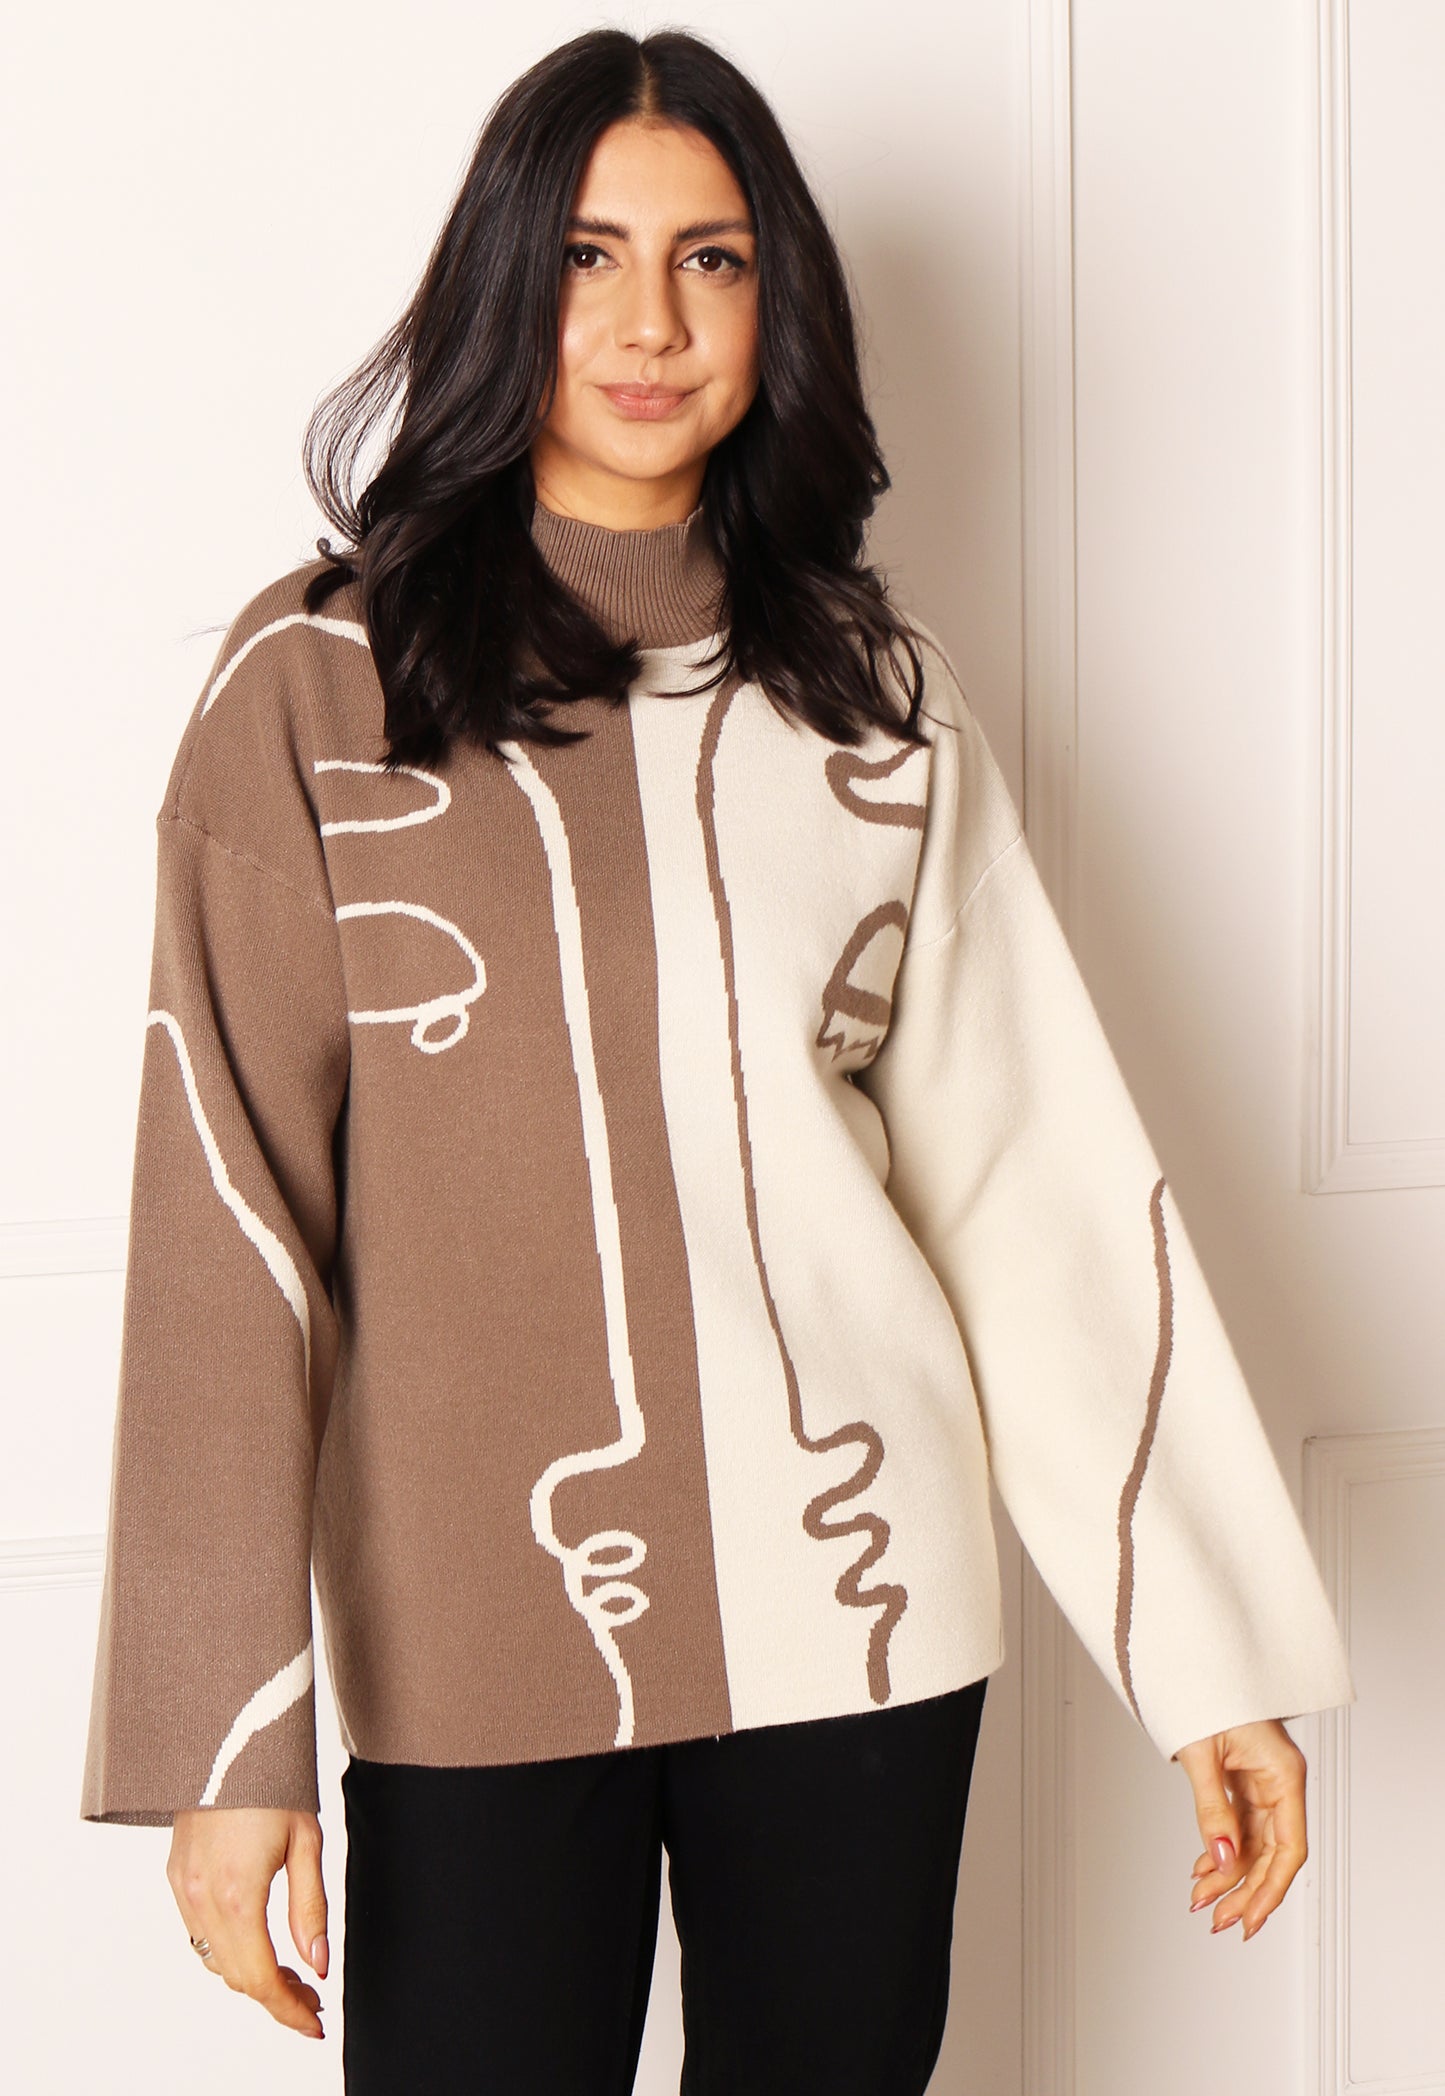 VILA Mee Abstract Faces Two Tone Jumper with Turtle Neck in Cream & Mocha - concretebartops